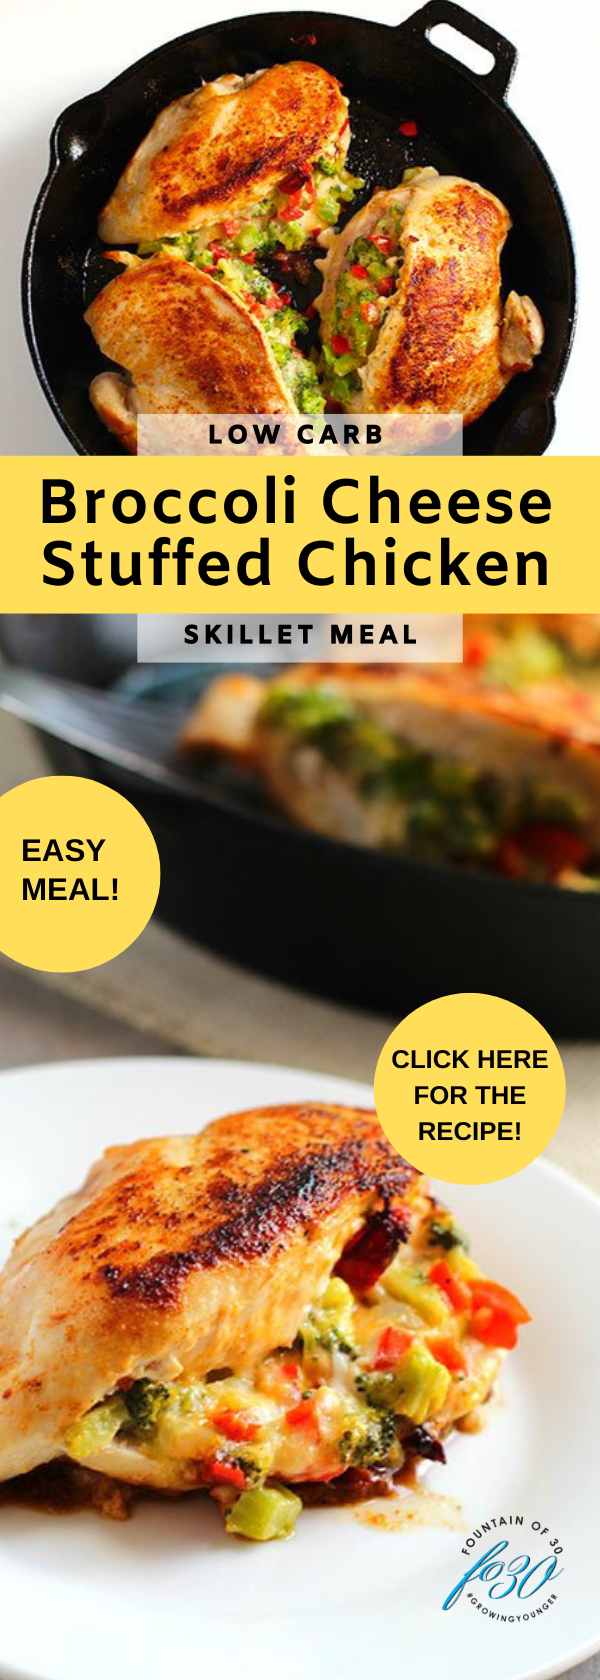 easy skillet meal broccoli cheese stuffed chicken low carb fountainof30